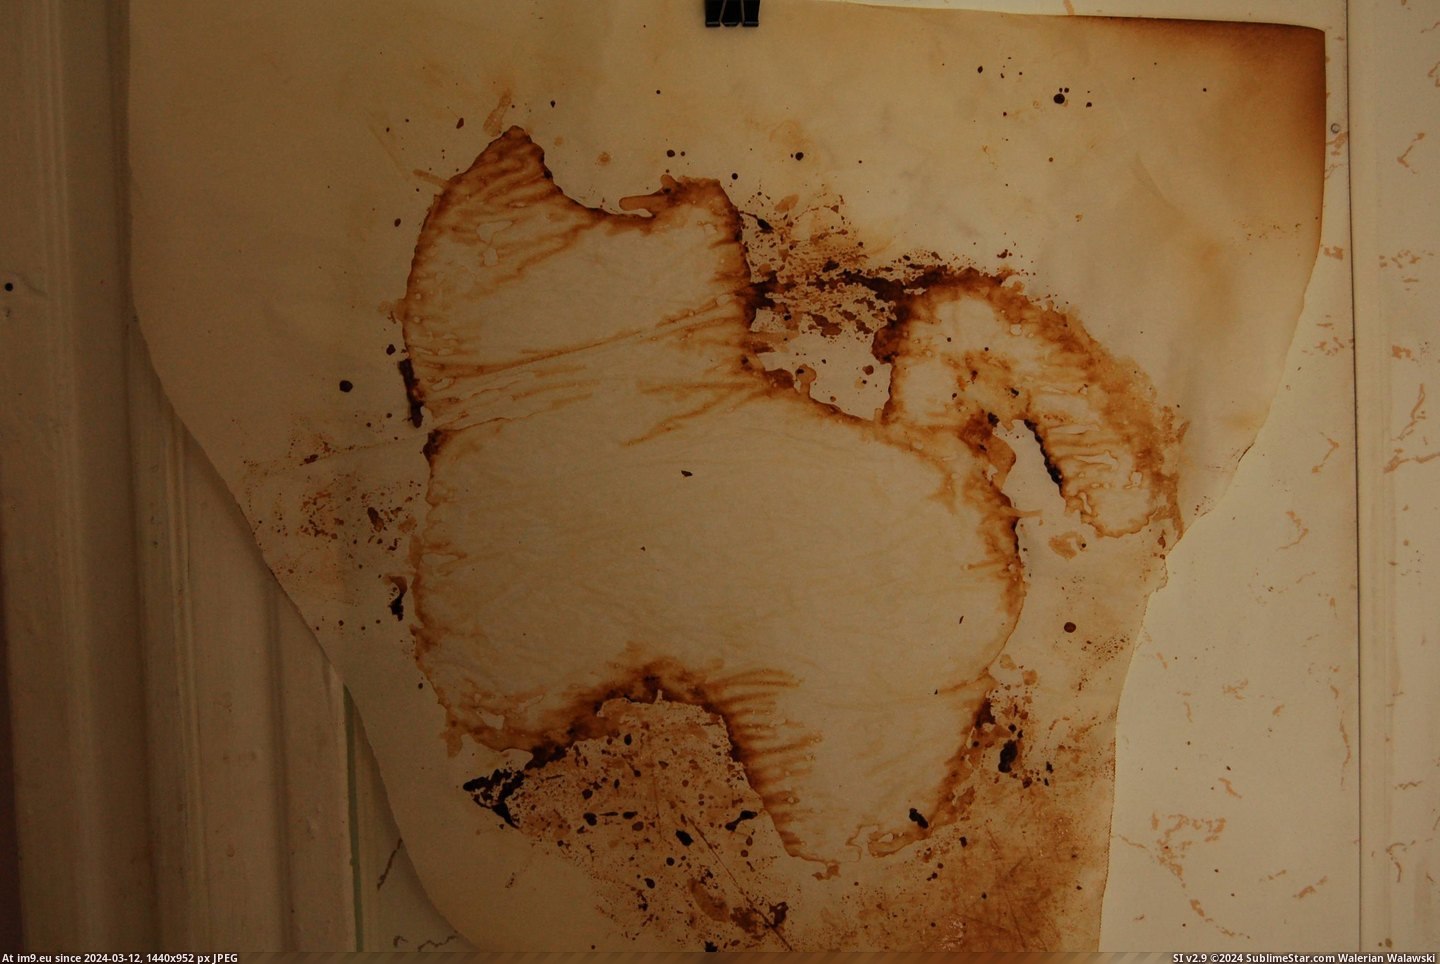 #Cat #Painting #Roommate #Cave #Cooked #Parchment #Paper #Pizza #Shaped [Mildlyinteresting] My roommate cooked a cat shaped pizza, the parchment paper he cooked it on now looks like a cave painting of Pic. (Image of album My r/MILDLYINTERESTING favs))